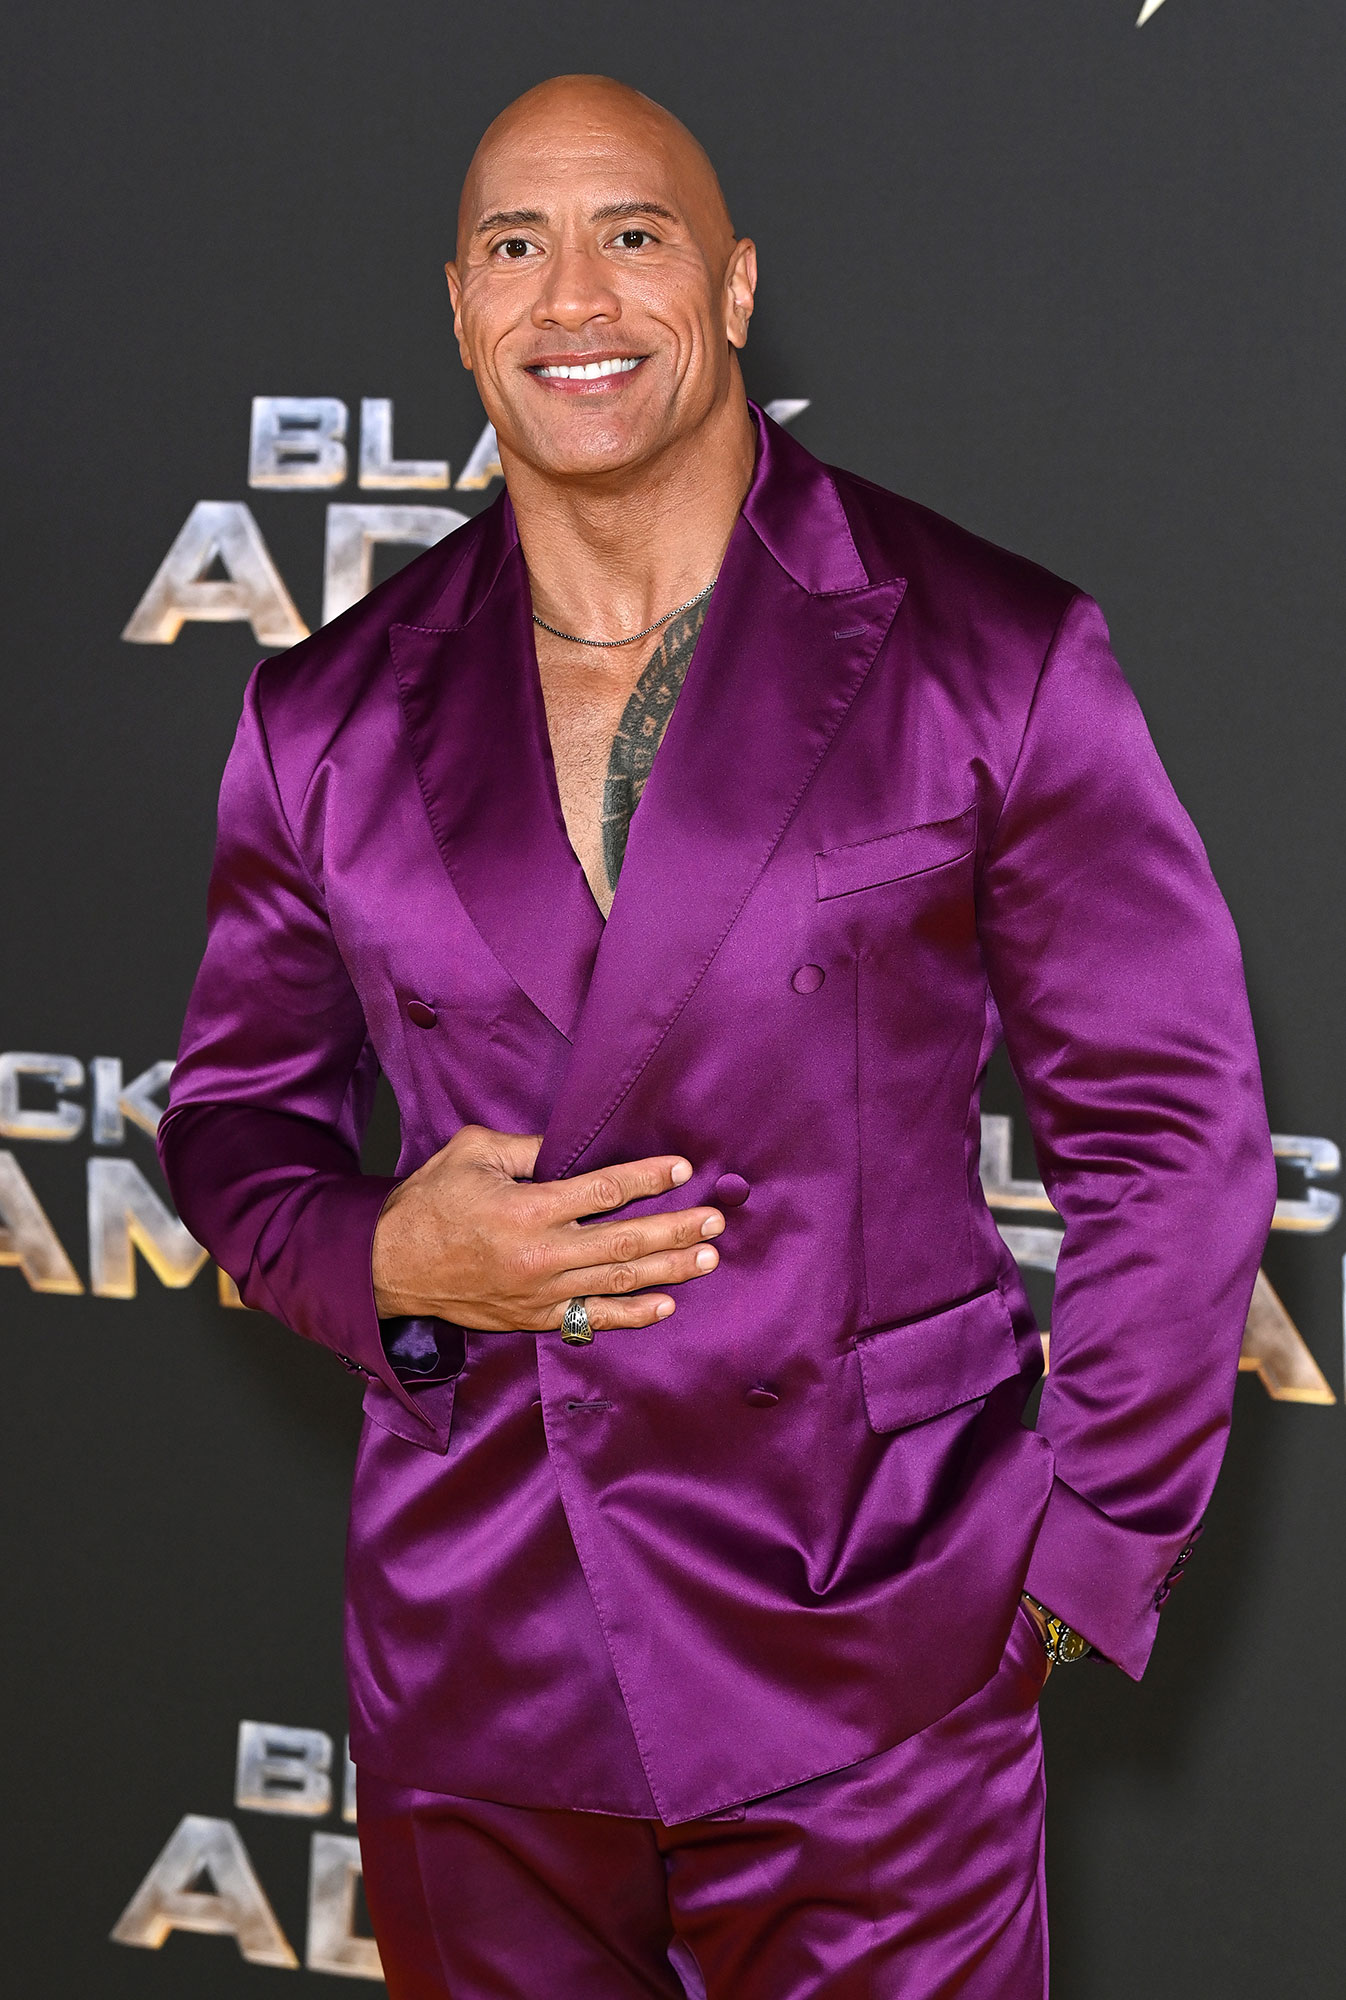 The Rock Speaks Out About Black Adam's Future: What to Know